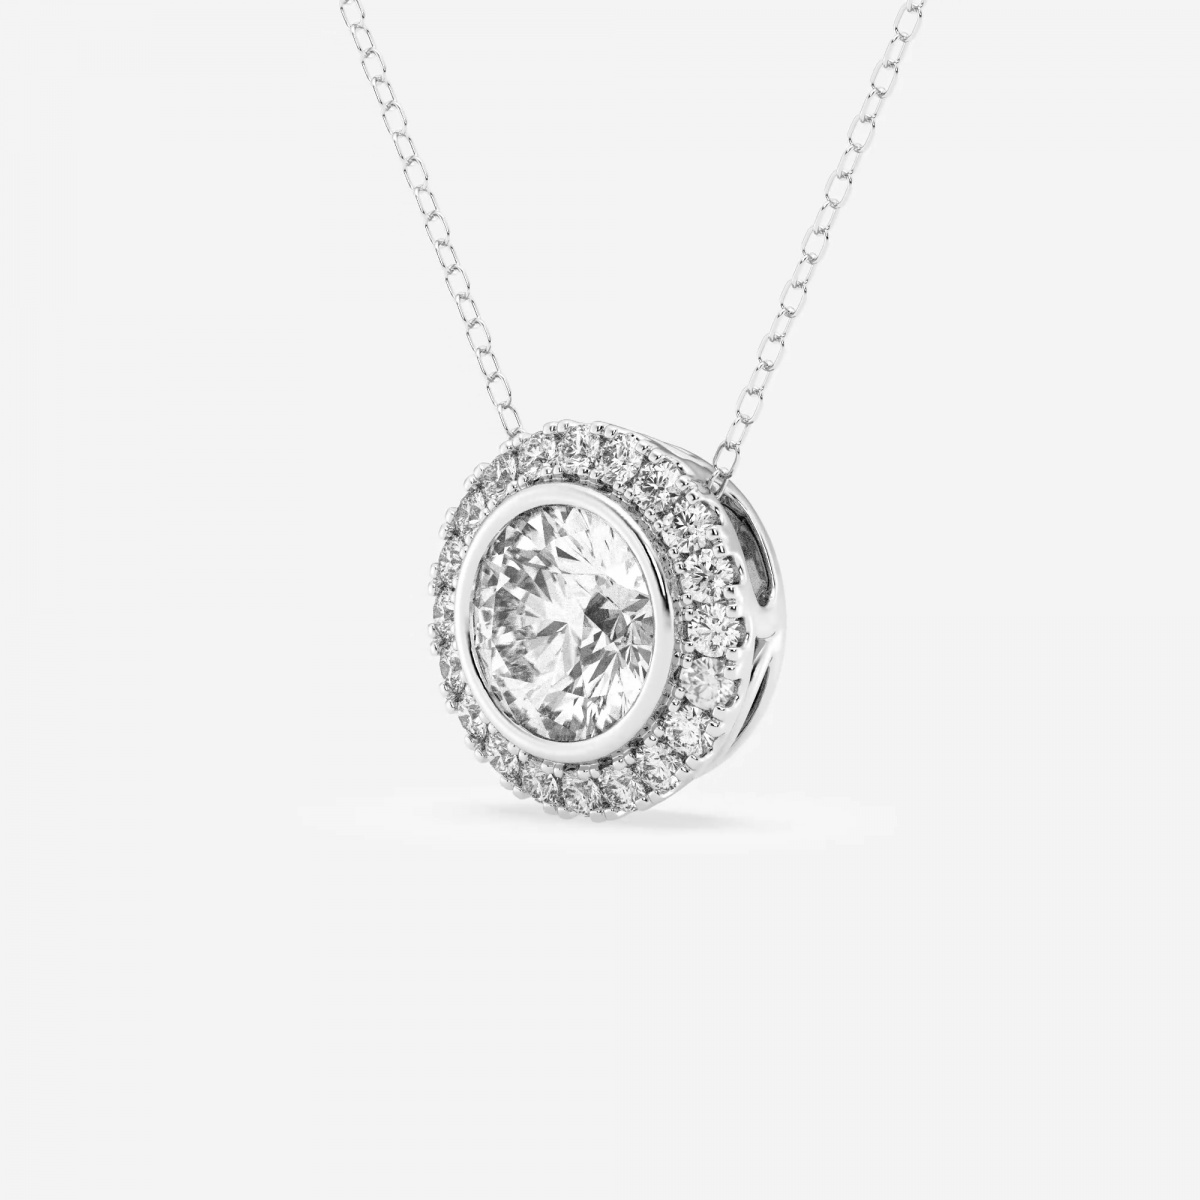 Additional Image 1 for  2 1/4 ctw Round Lab Grown Diamond Bezel Set Halo Pendant with Adjustable Chain